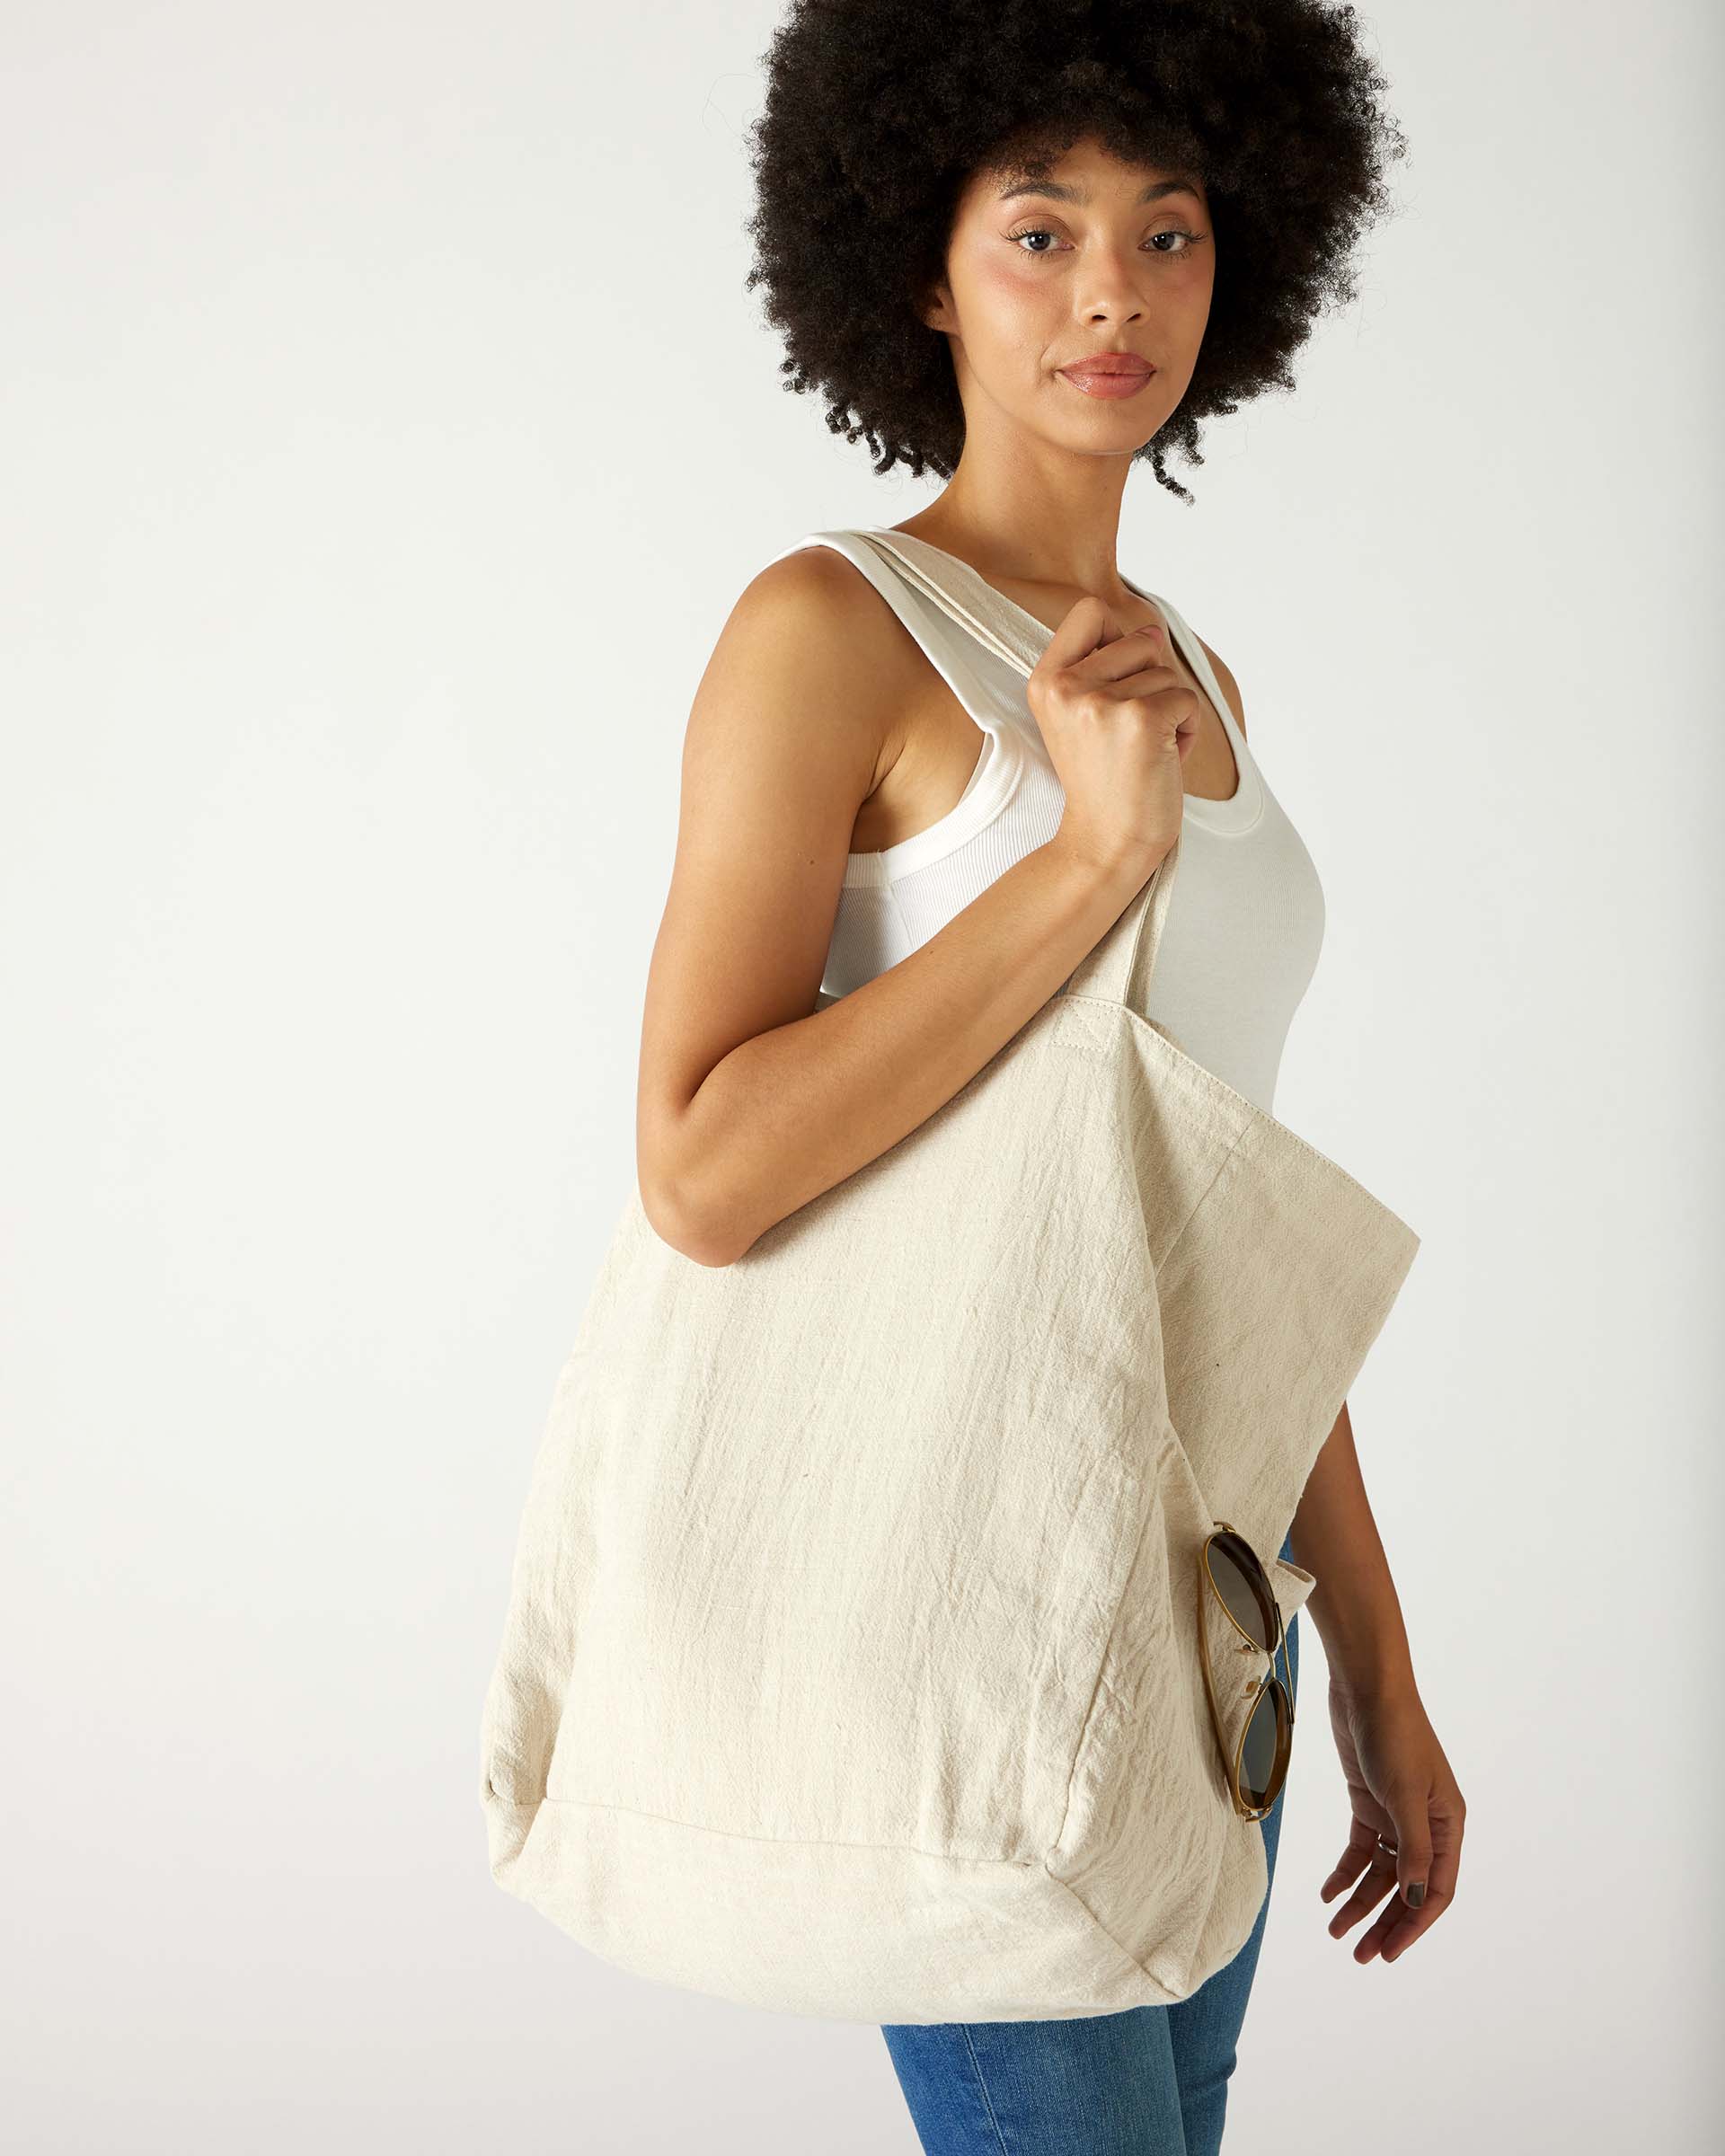 profile of woman with mersea oversized canvas tote in neutral flax over shoulder